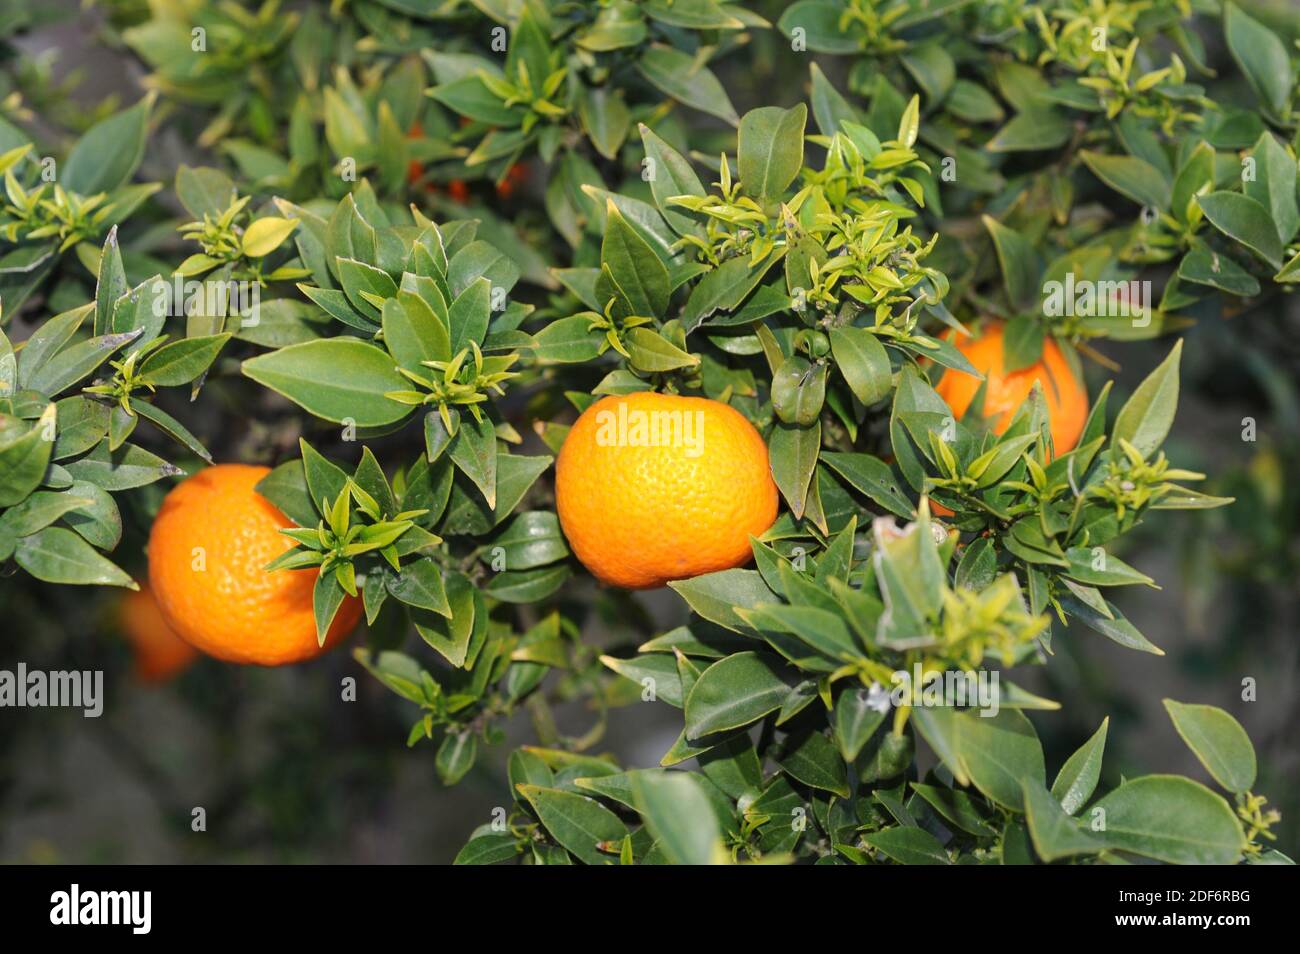 Mandarin orange (Citrus reticulata clementina) is a small tree native to south China. Its fruits (mandarines) are edible. Fruits and leaves detail. Stock Photo